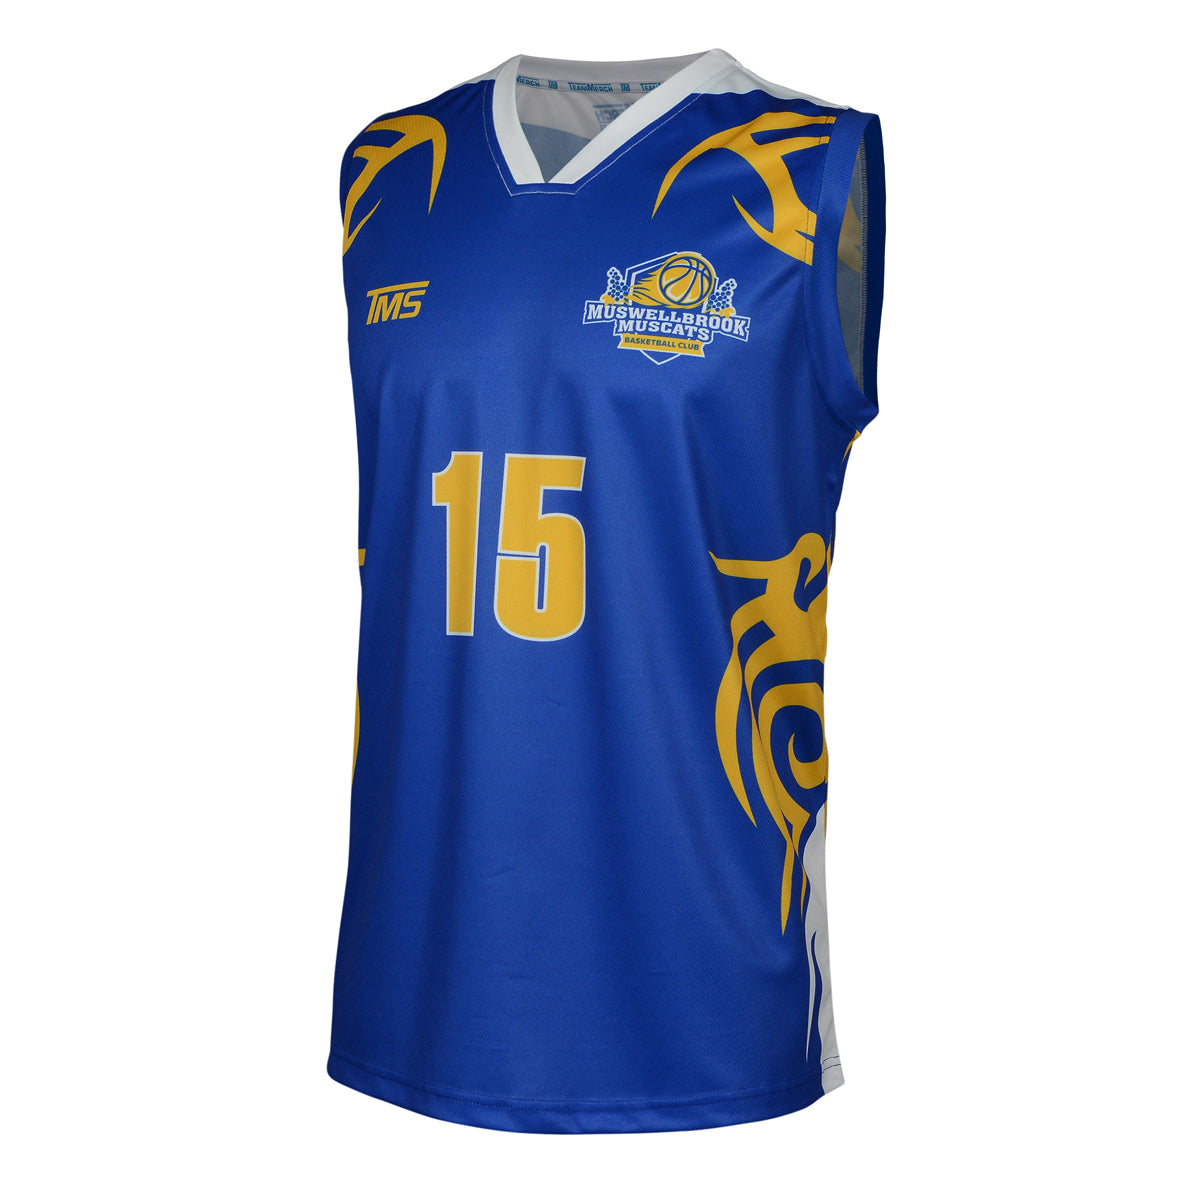 Digital artist at a computer using our online tool to design a basketball jersey, illustrating the user-friendly process of applying full sublimation techniques for striking and durable sportswear.